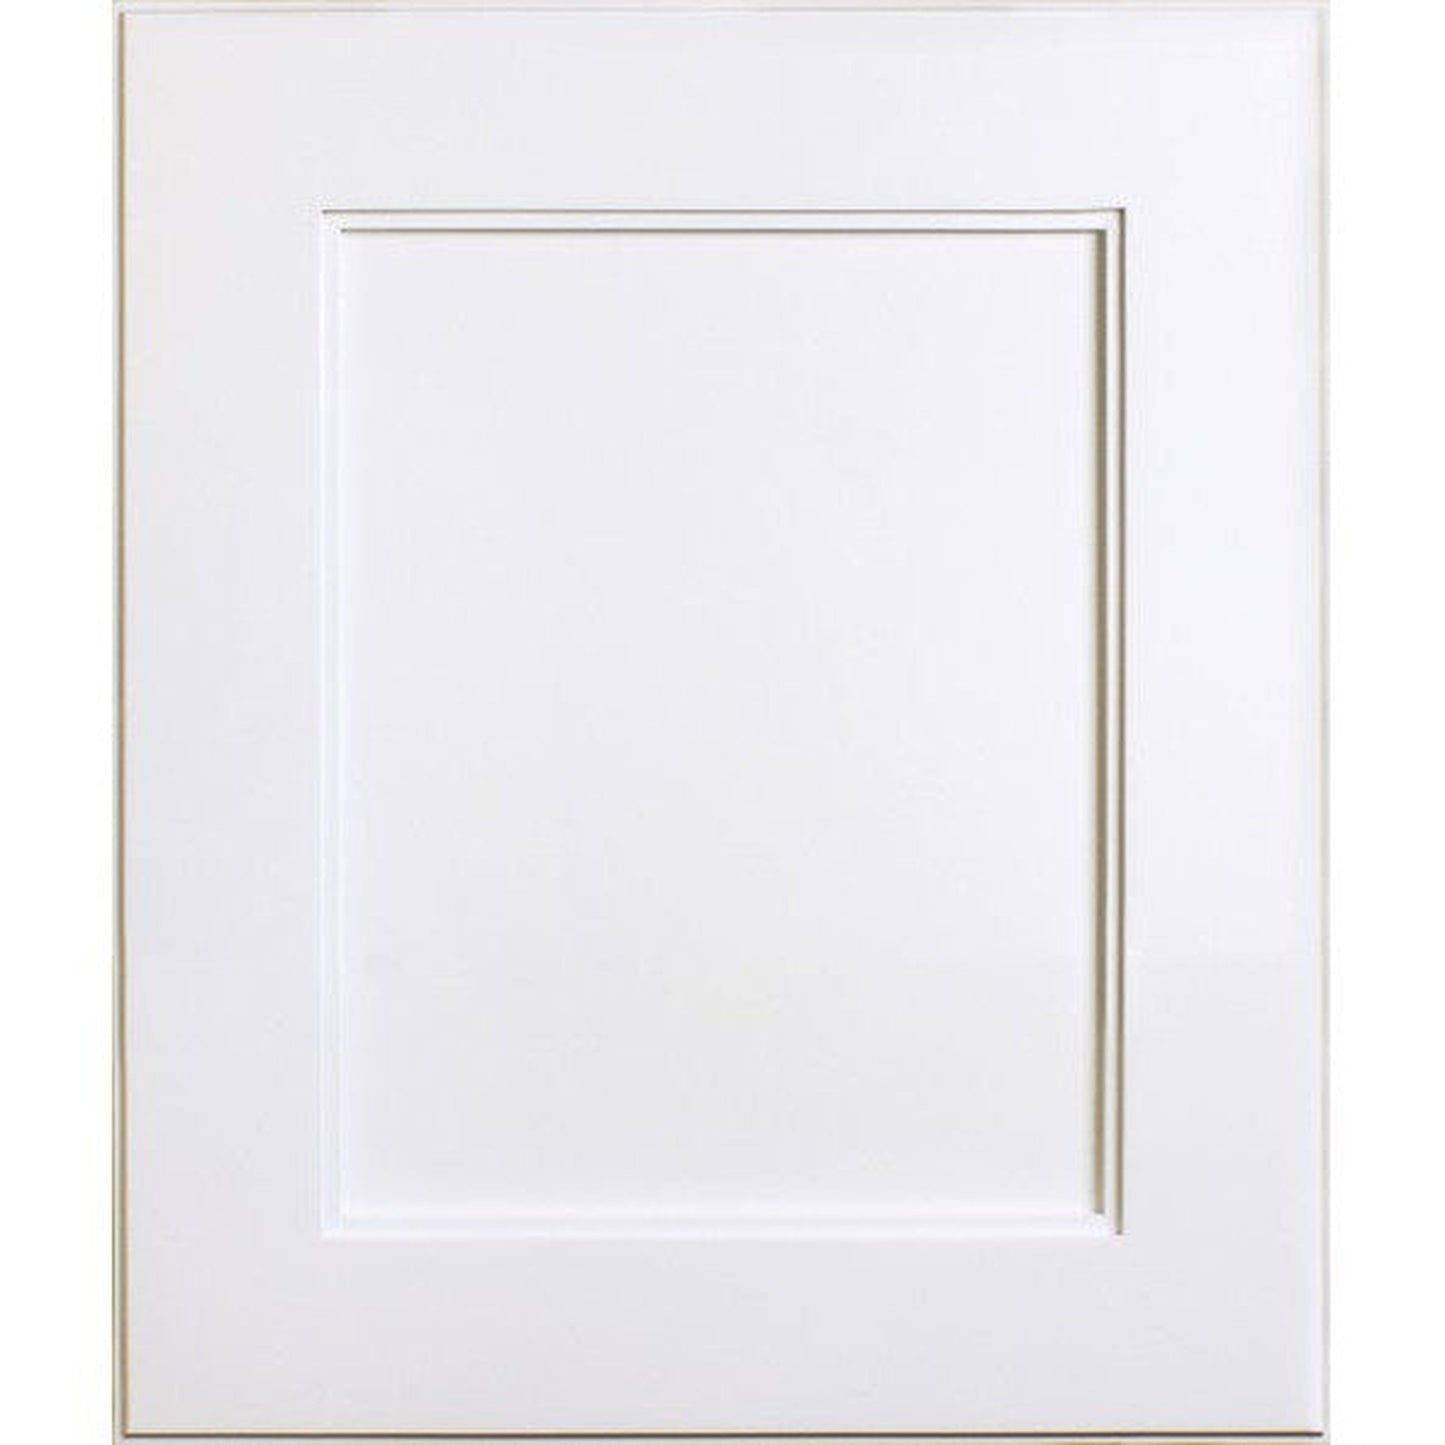 Fox Hollow Furnishings 14" x 18" White Shaker Style Natural Interior Standard 4" Depth Recessed Medicine Cabinet